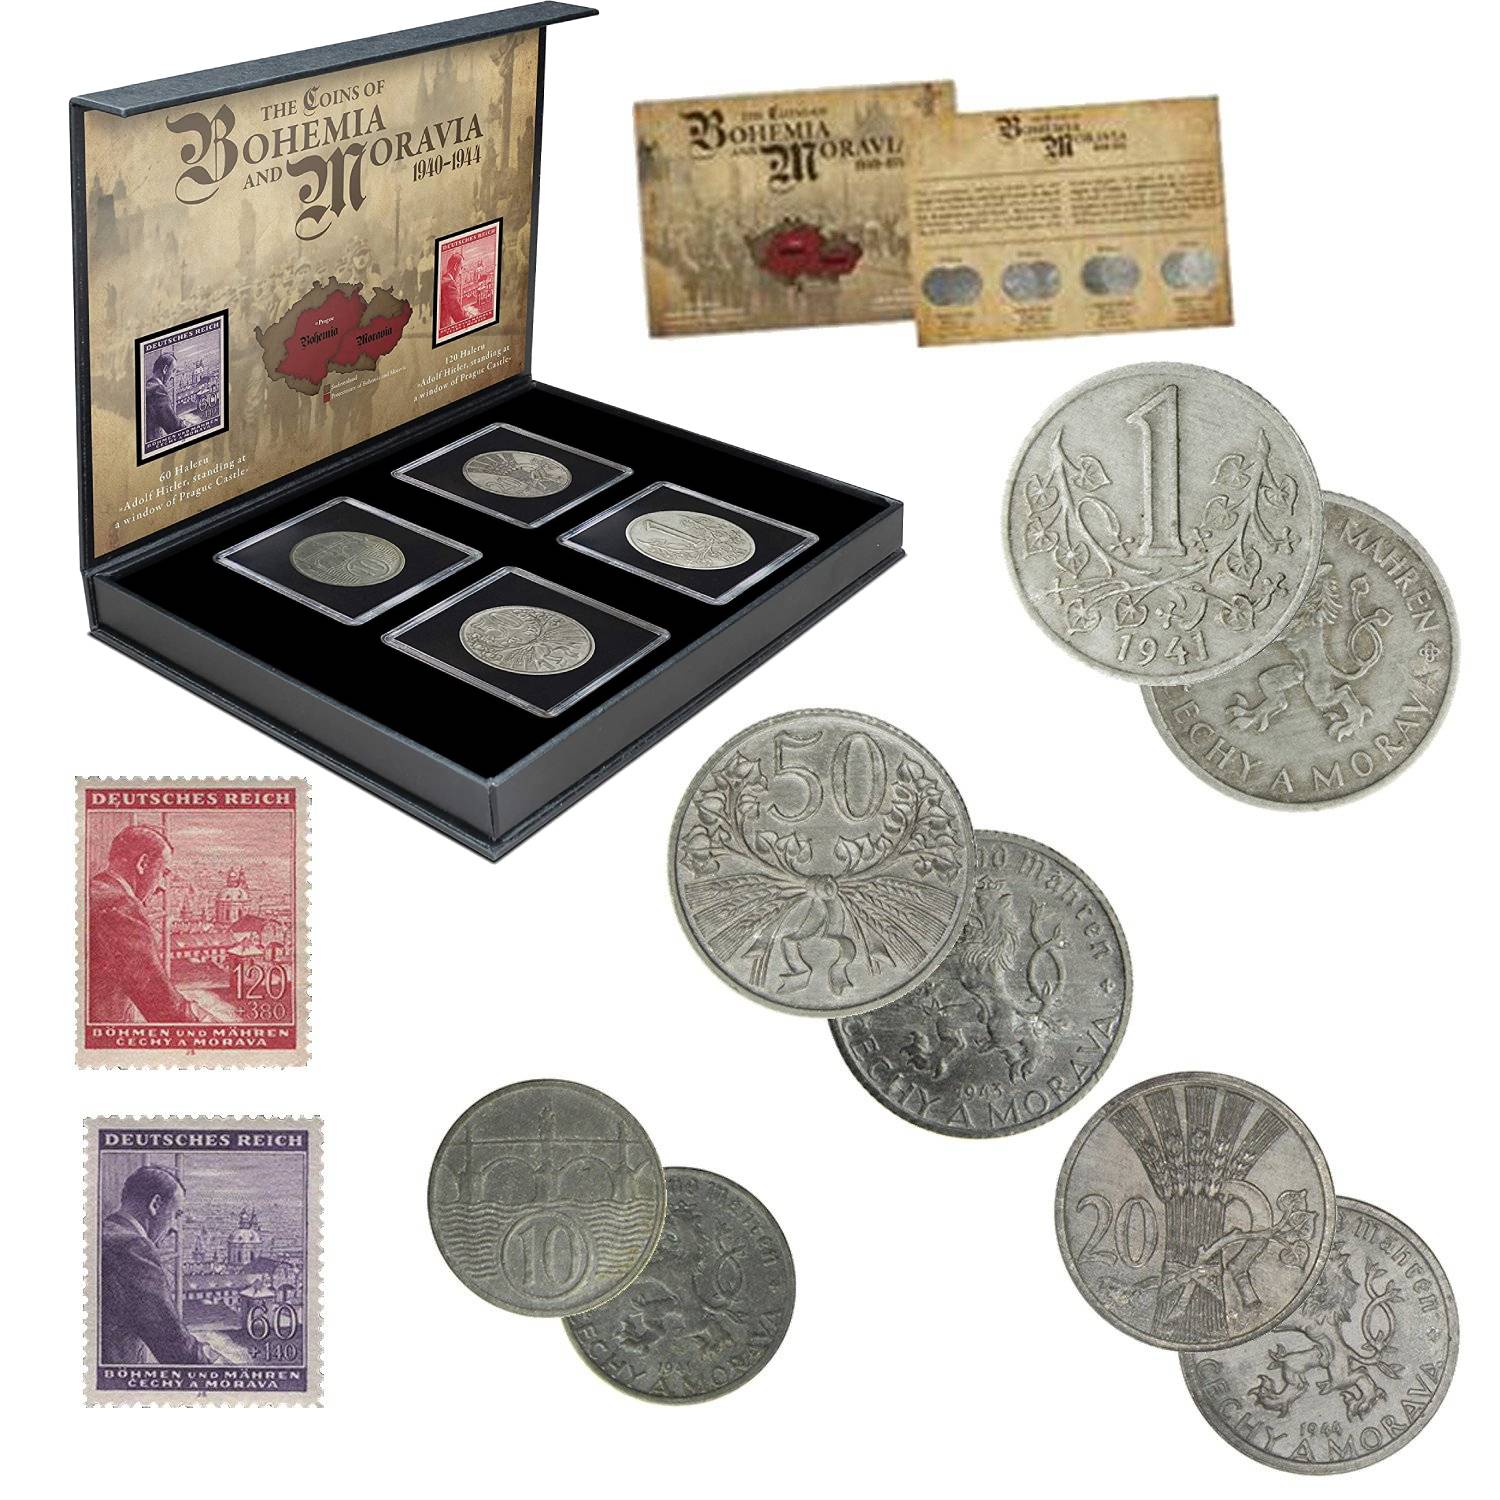 World War II - 4 coins and 2 stamps of Bohemia & Moravia 1940-1944